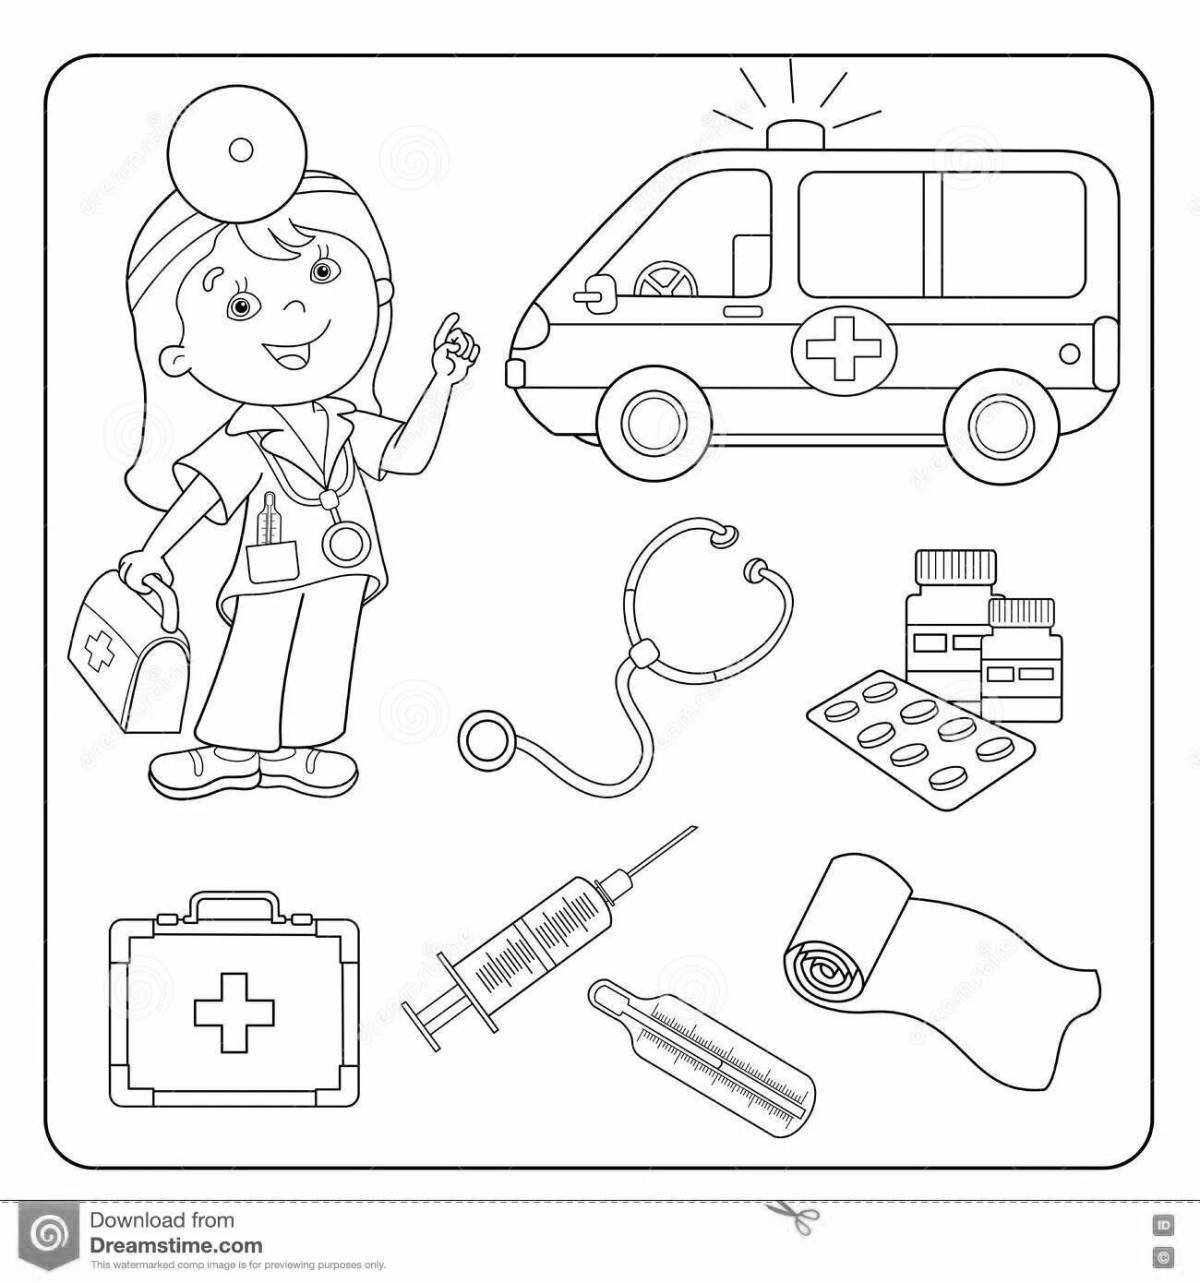 Coloring book outstanding medical instruments